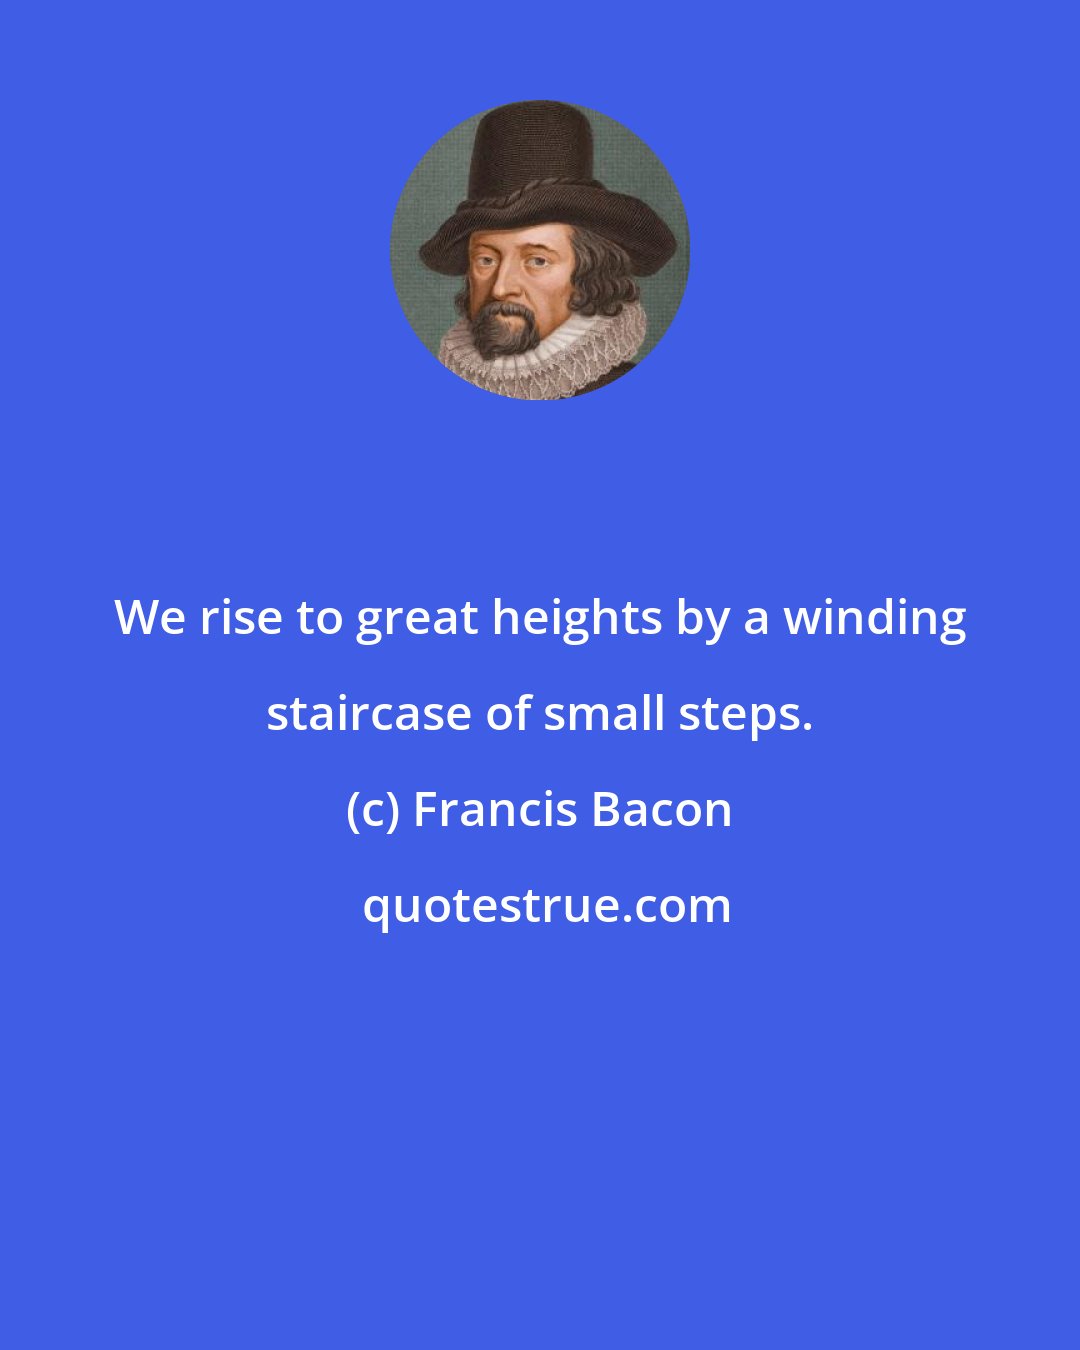 Francis Bacon: We rise to great heights by a winding staircase of small steps.